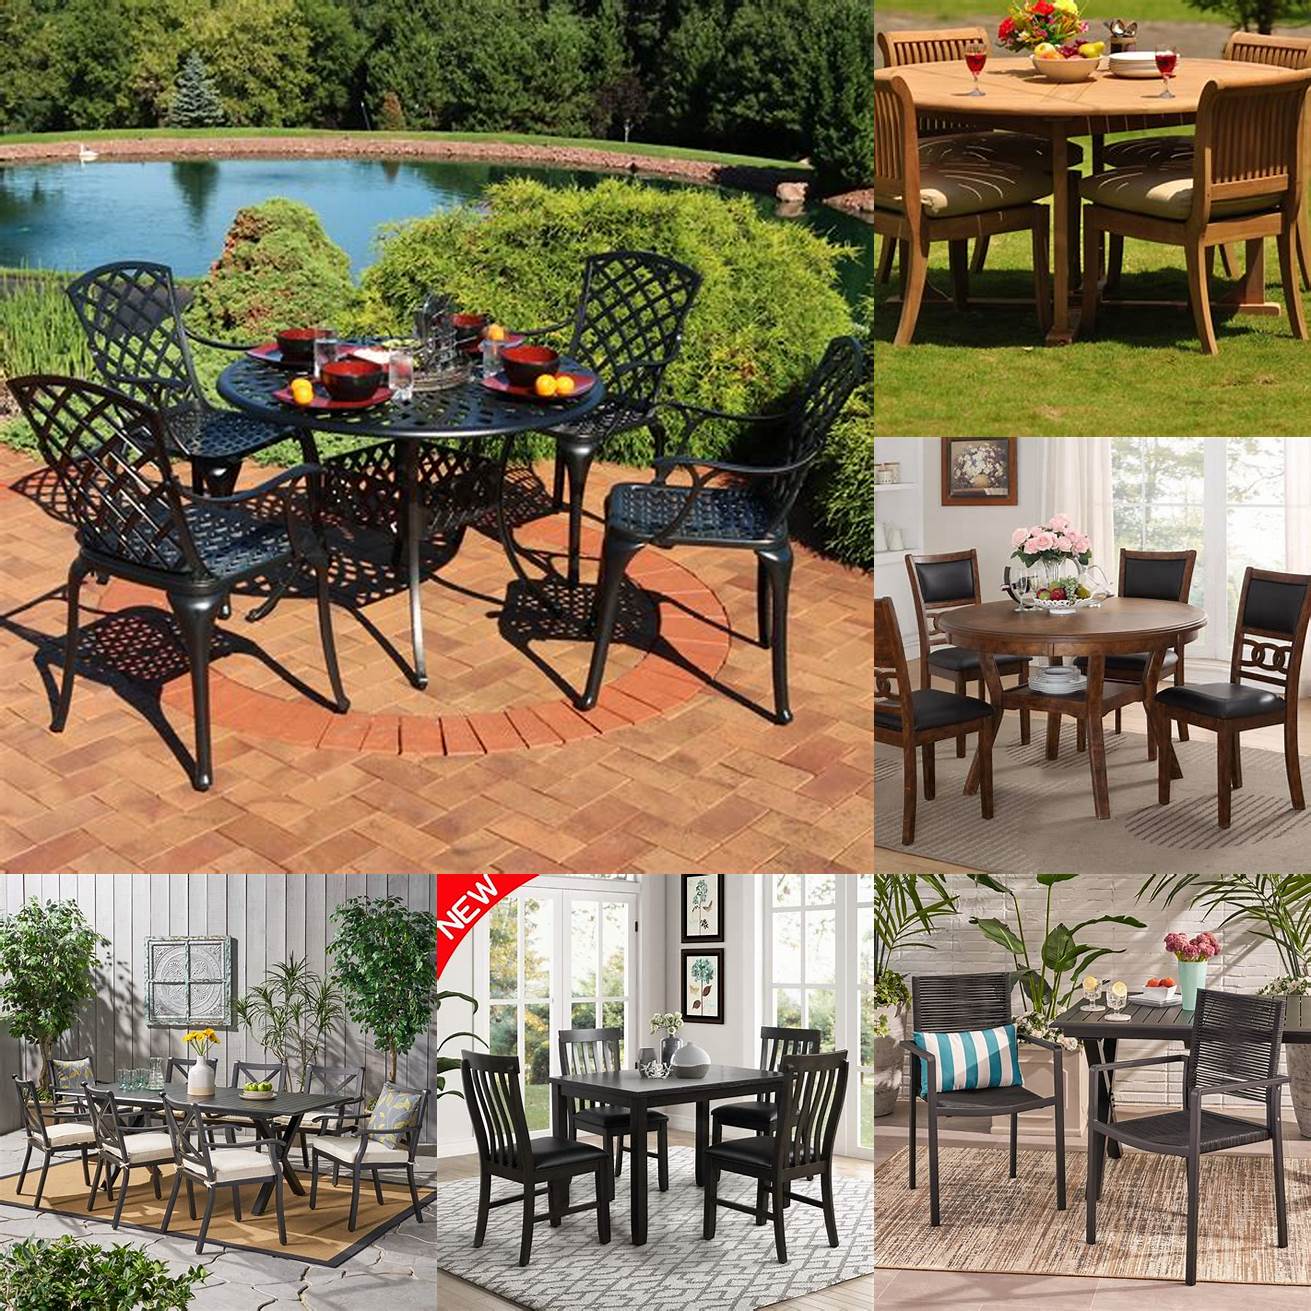 Durable Tables and Chairs